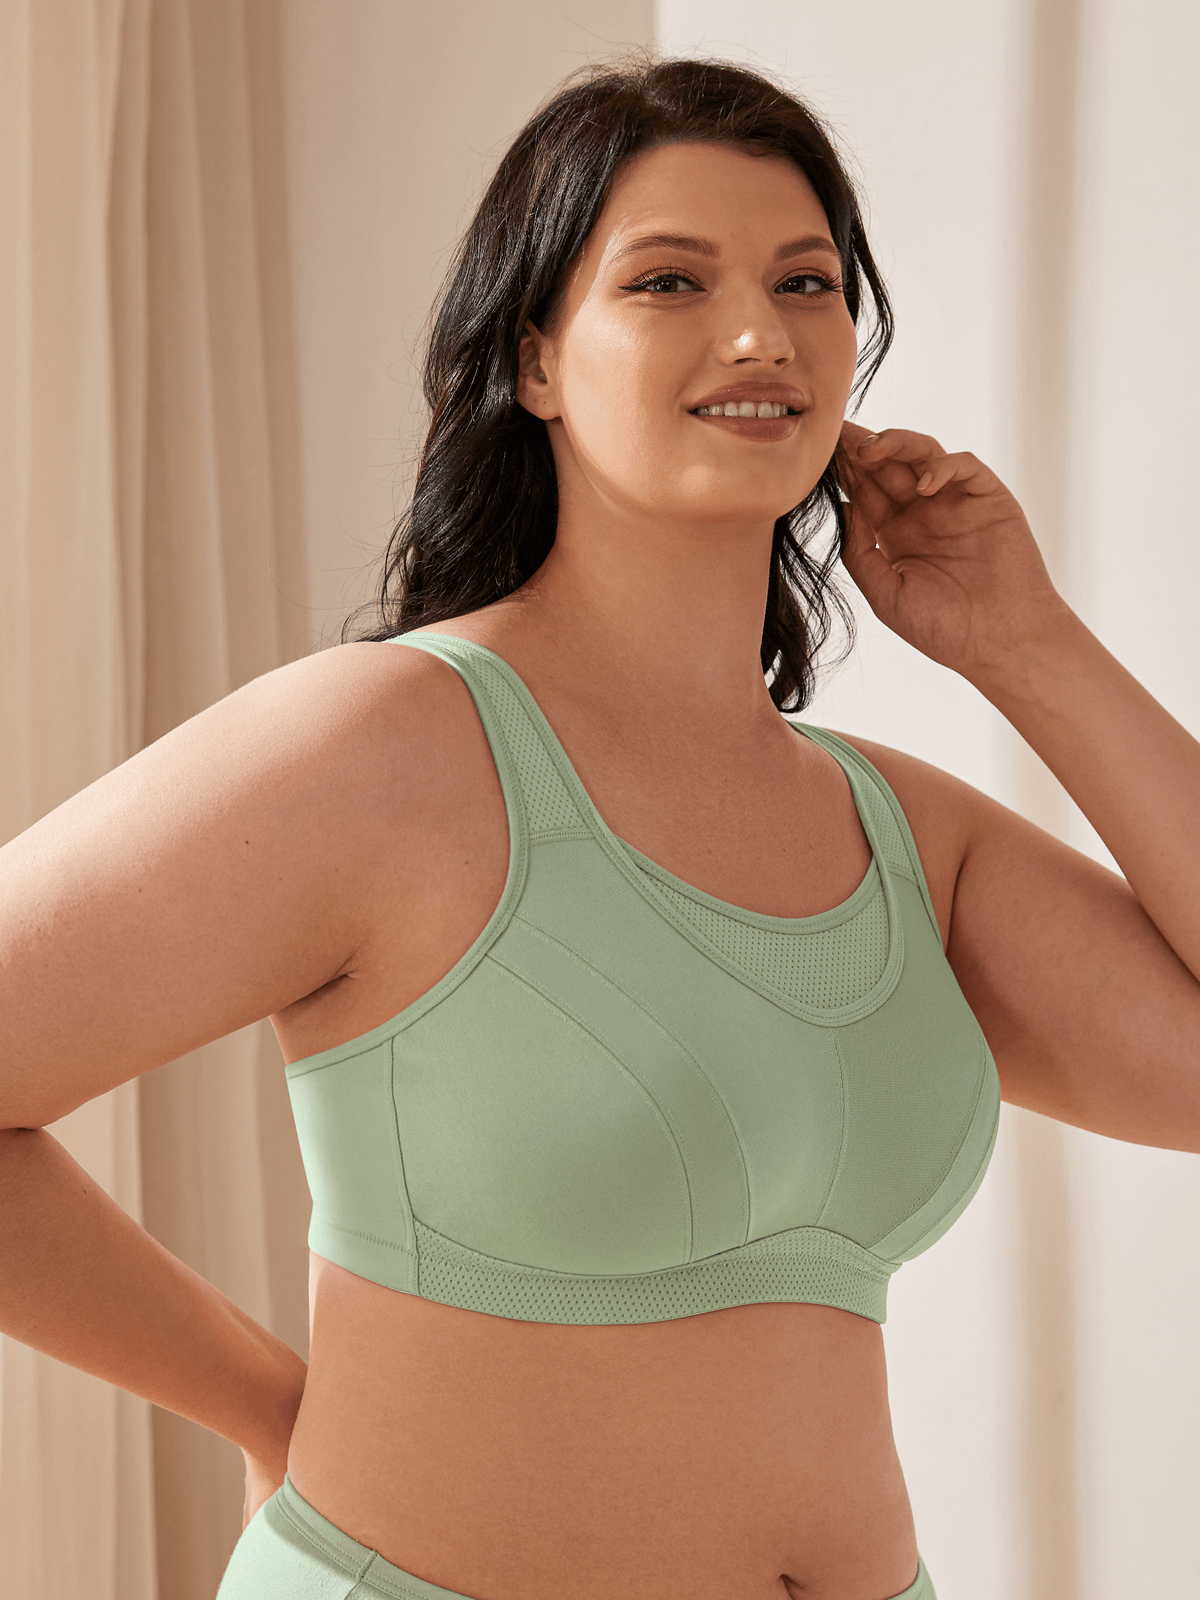 Big Boobs Workouthigh Impact Sports Bra For Big Boobs - Wireless, Push-up, Plus  Size